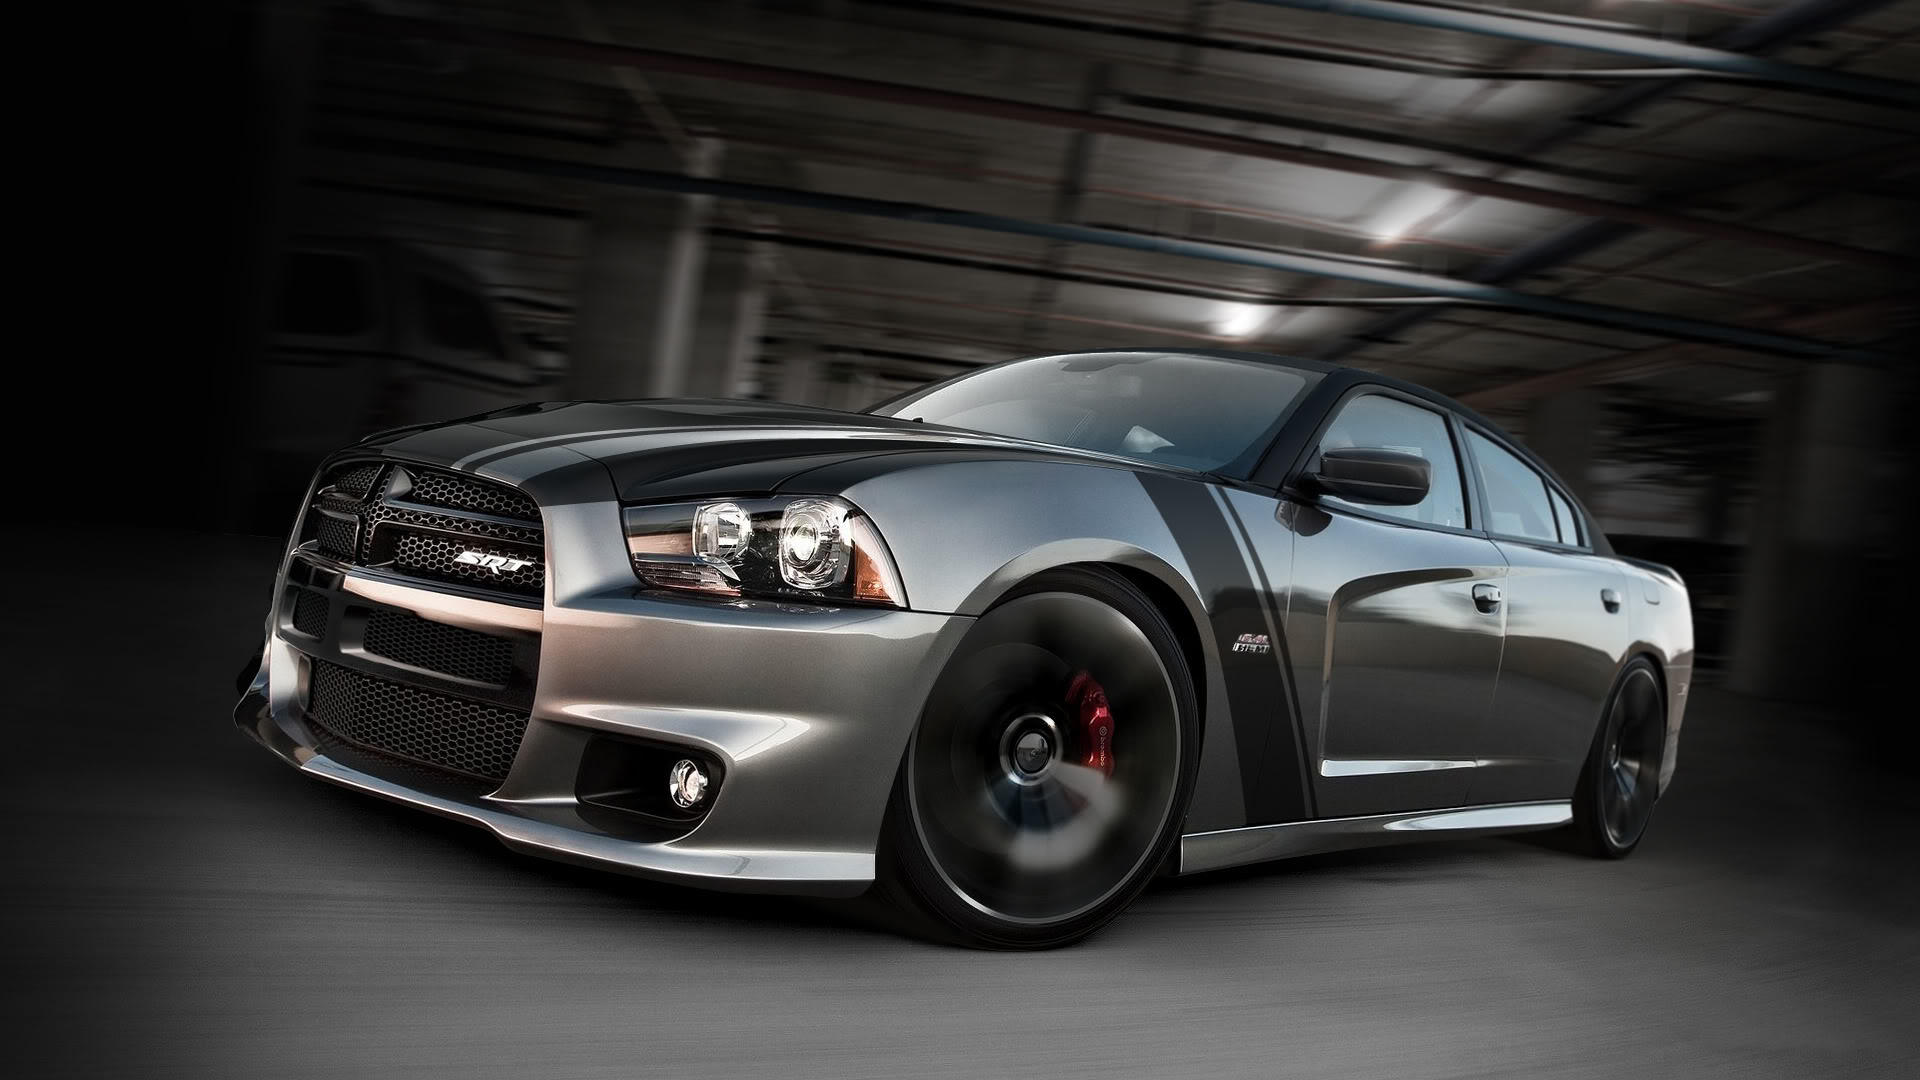 HD Quality Wallpaper | Collection: Vehicles, 1920x1080 Dodge Charger Srt8